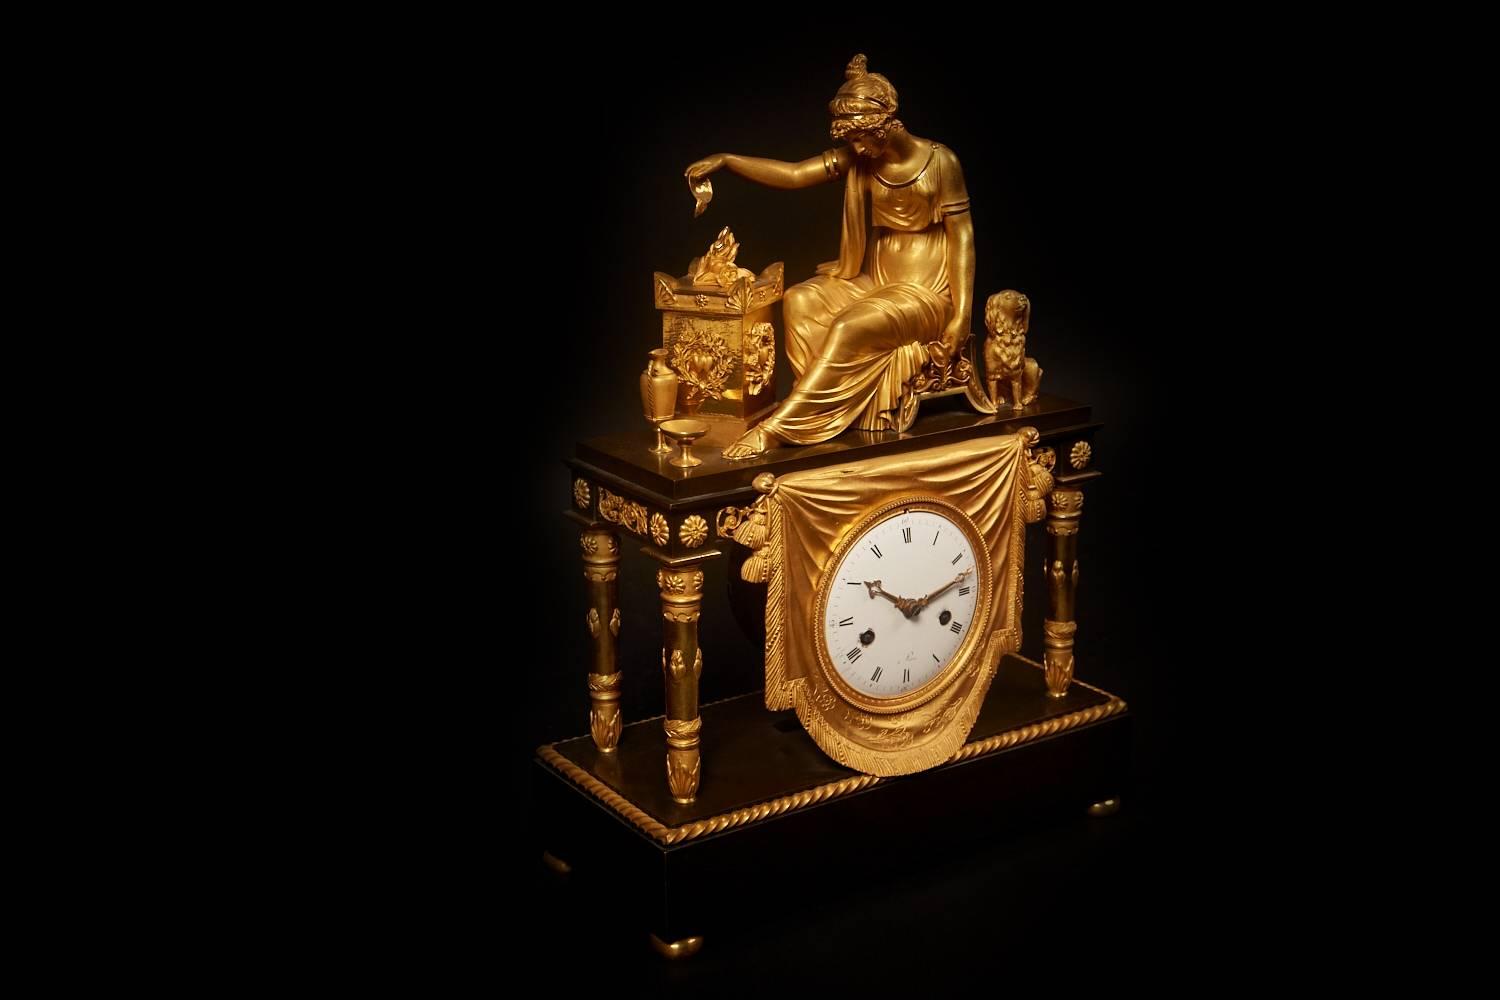 French Empire Gilt and Patinated Mantel Clock 'Sacrifice a L'amour', Paris 19th Century